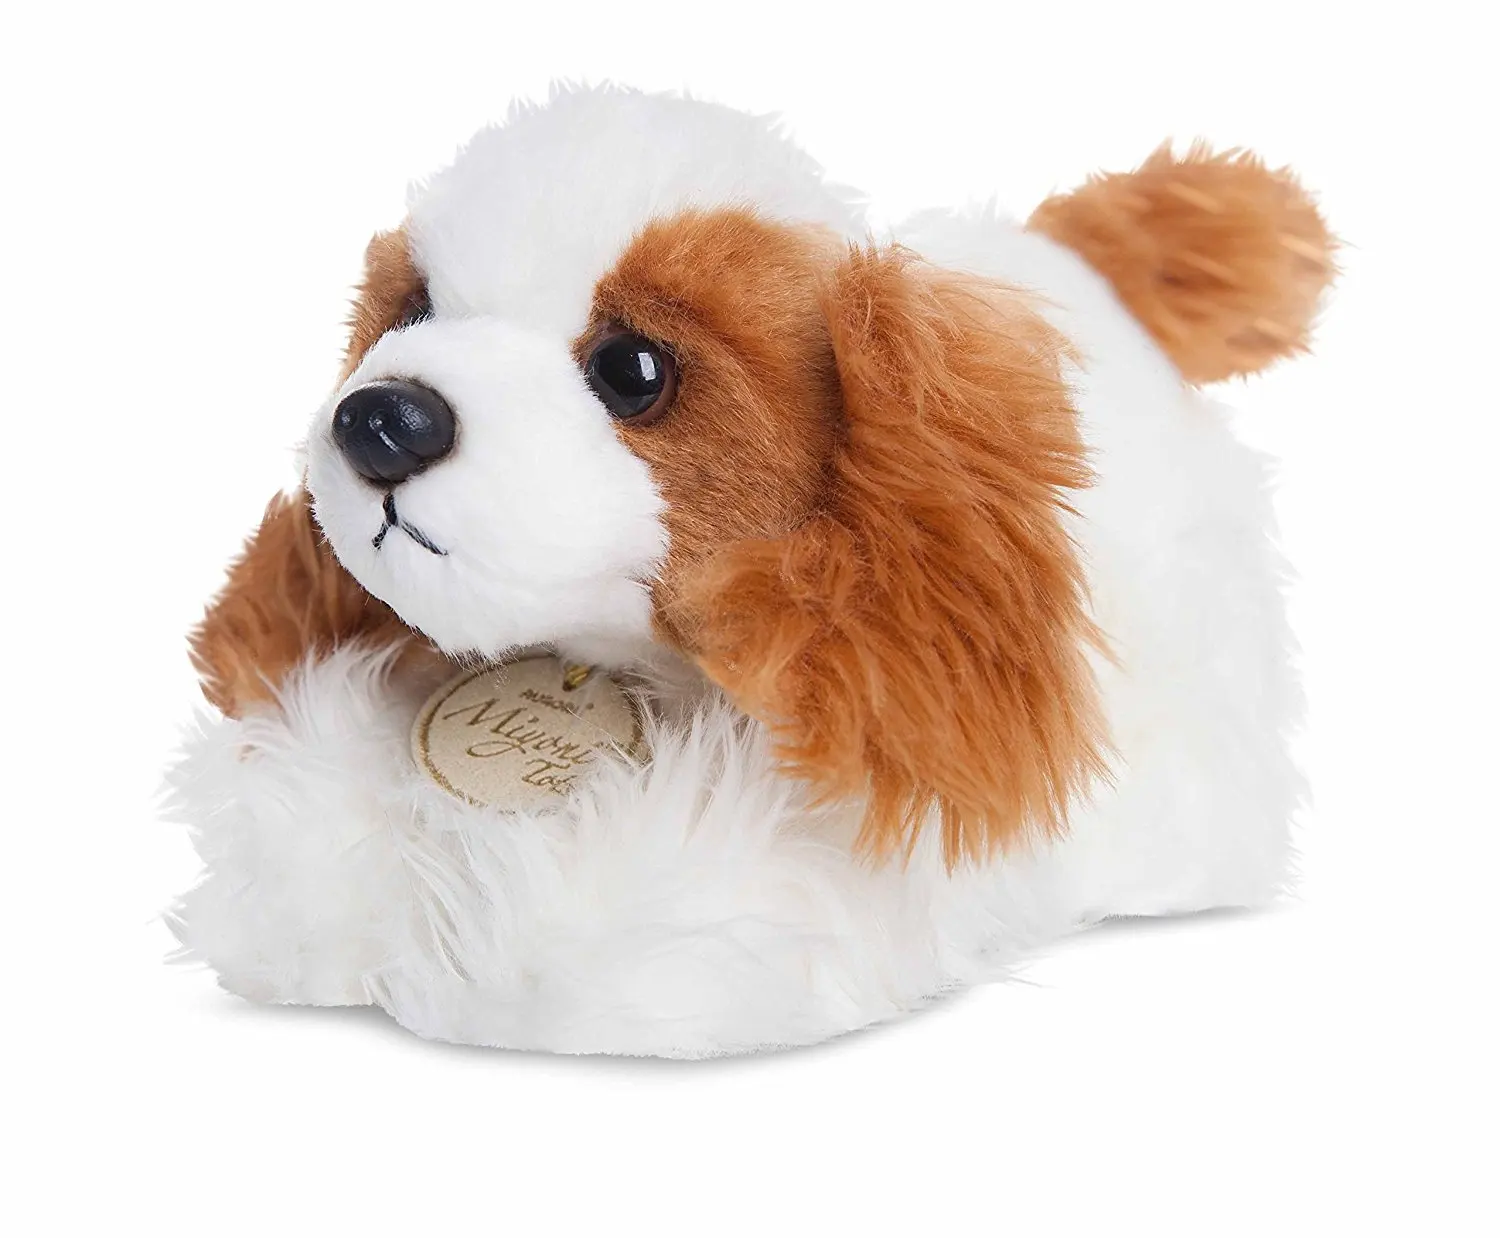 Cheap Spaniel Soft Toy Find Spaniel Soft Toy Deals On Line At Alibaba Com